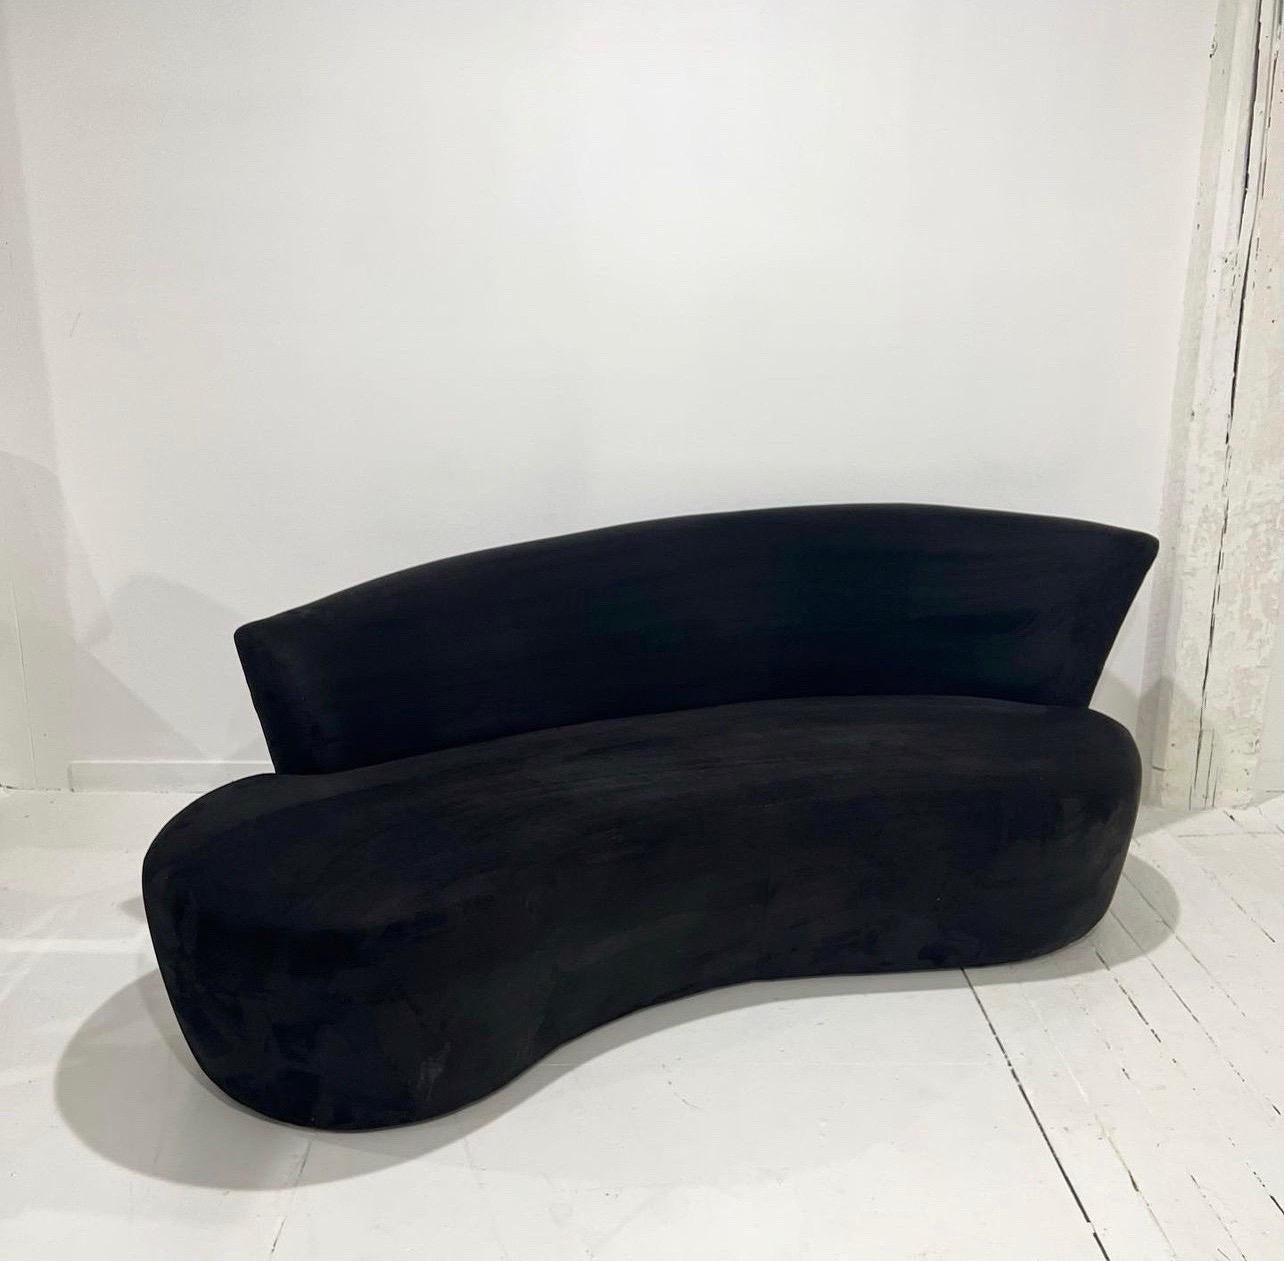 Post-Modern Vladimir Kagan Curved Black Sofa for Weiman / Preview